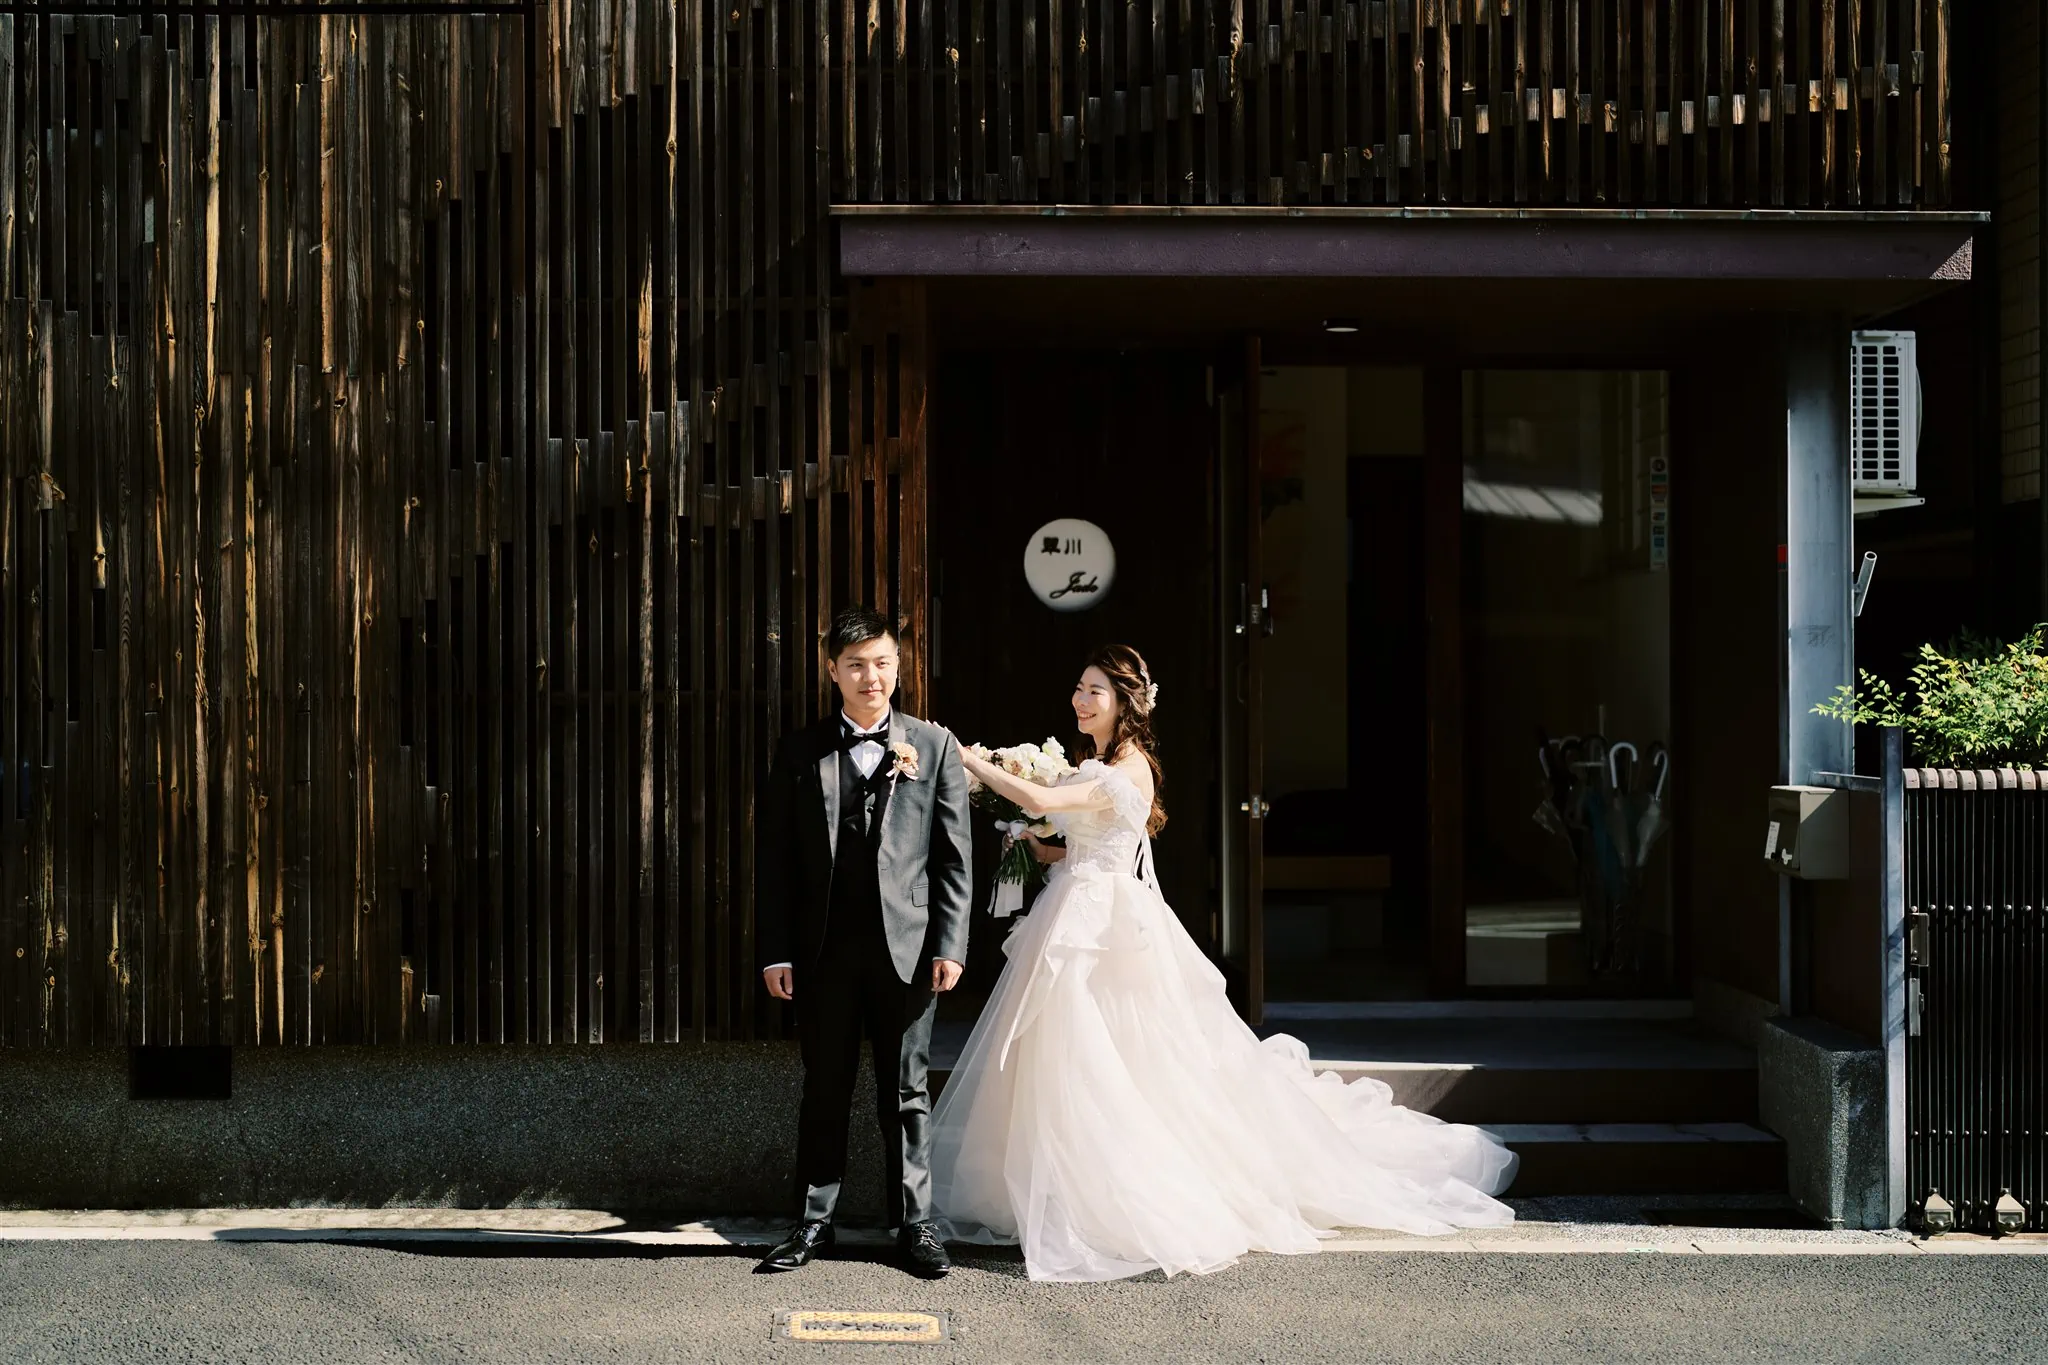 Kyoto Tokyo Japan Elopement Wedding Photographer, Planner & Videographer | A Japan elopement photographer captures the momentous occasion of a bride and groom standing in front of a wooden building.